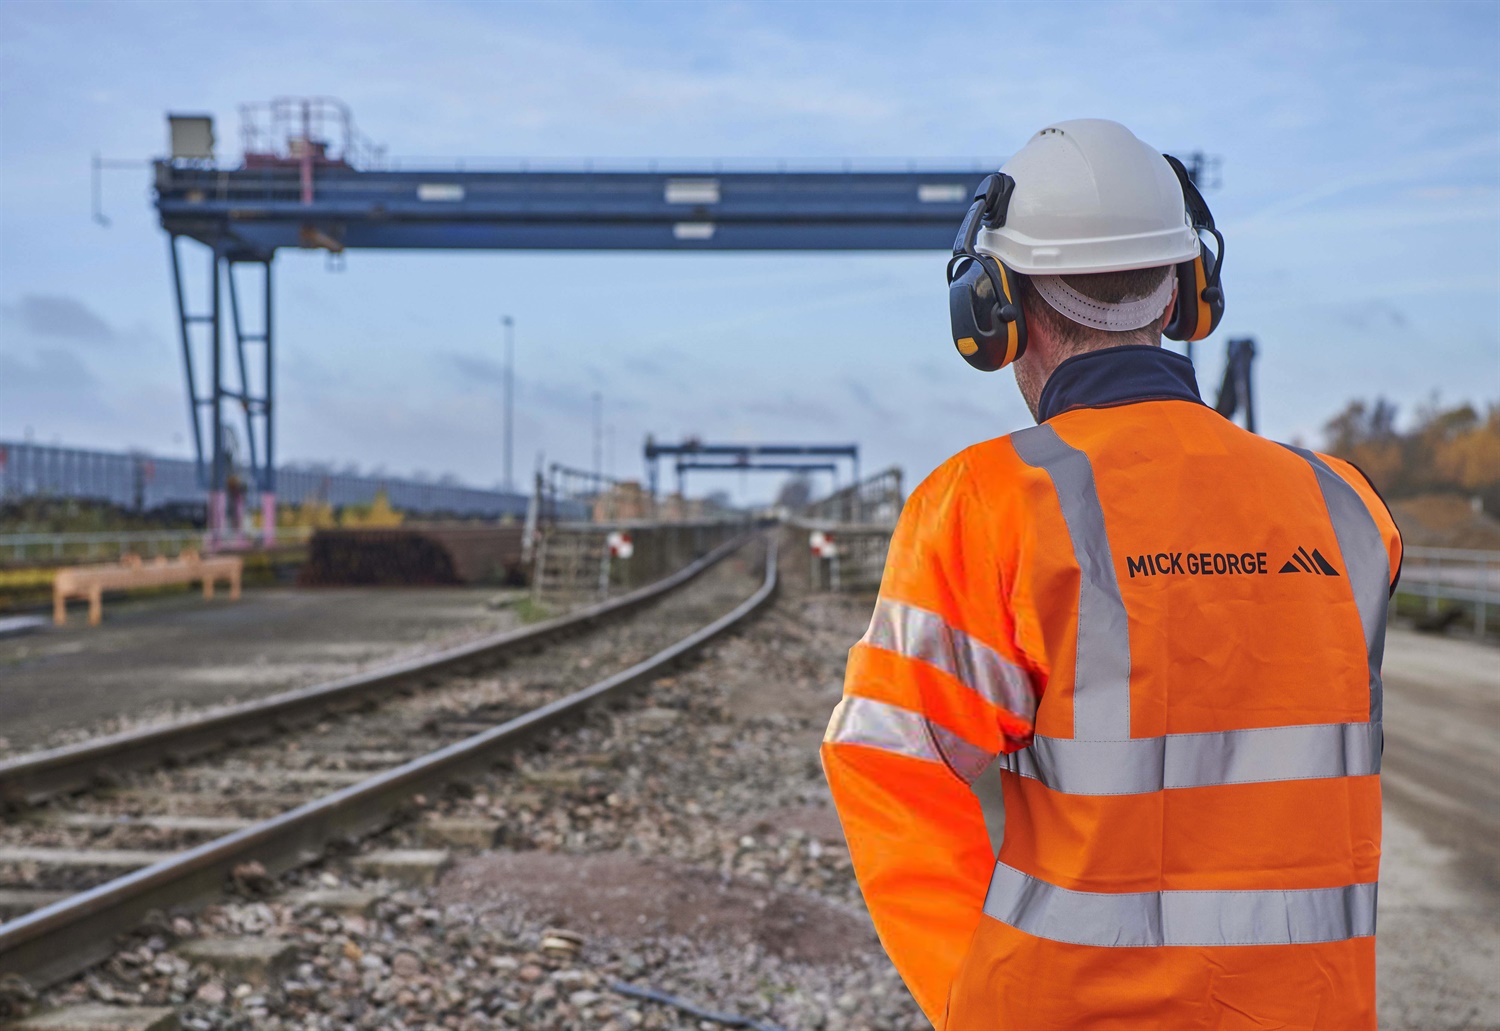 Cambridgeshire supplier opens doors to rail after RISQS accreditation